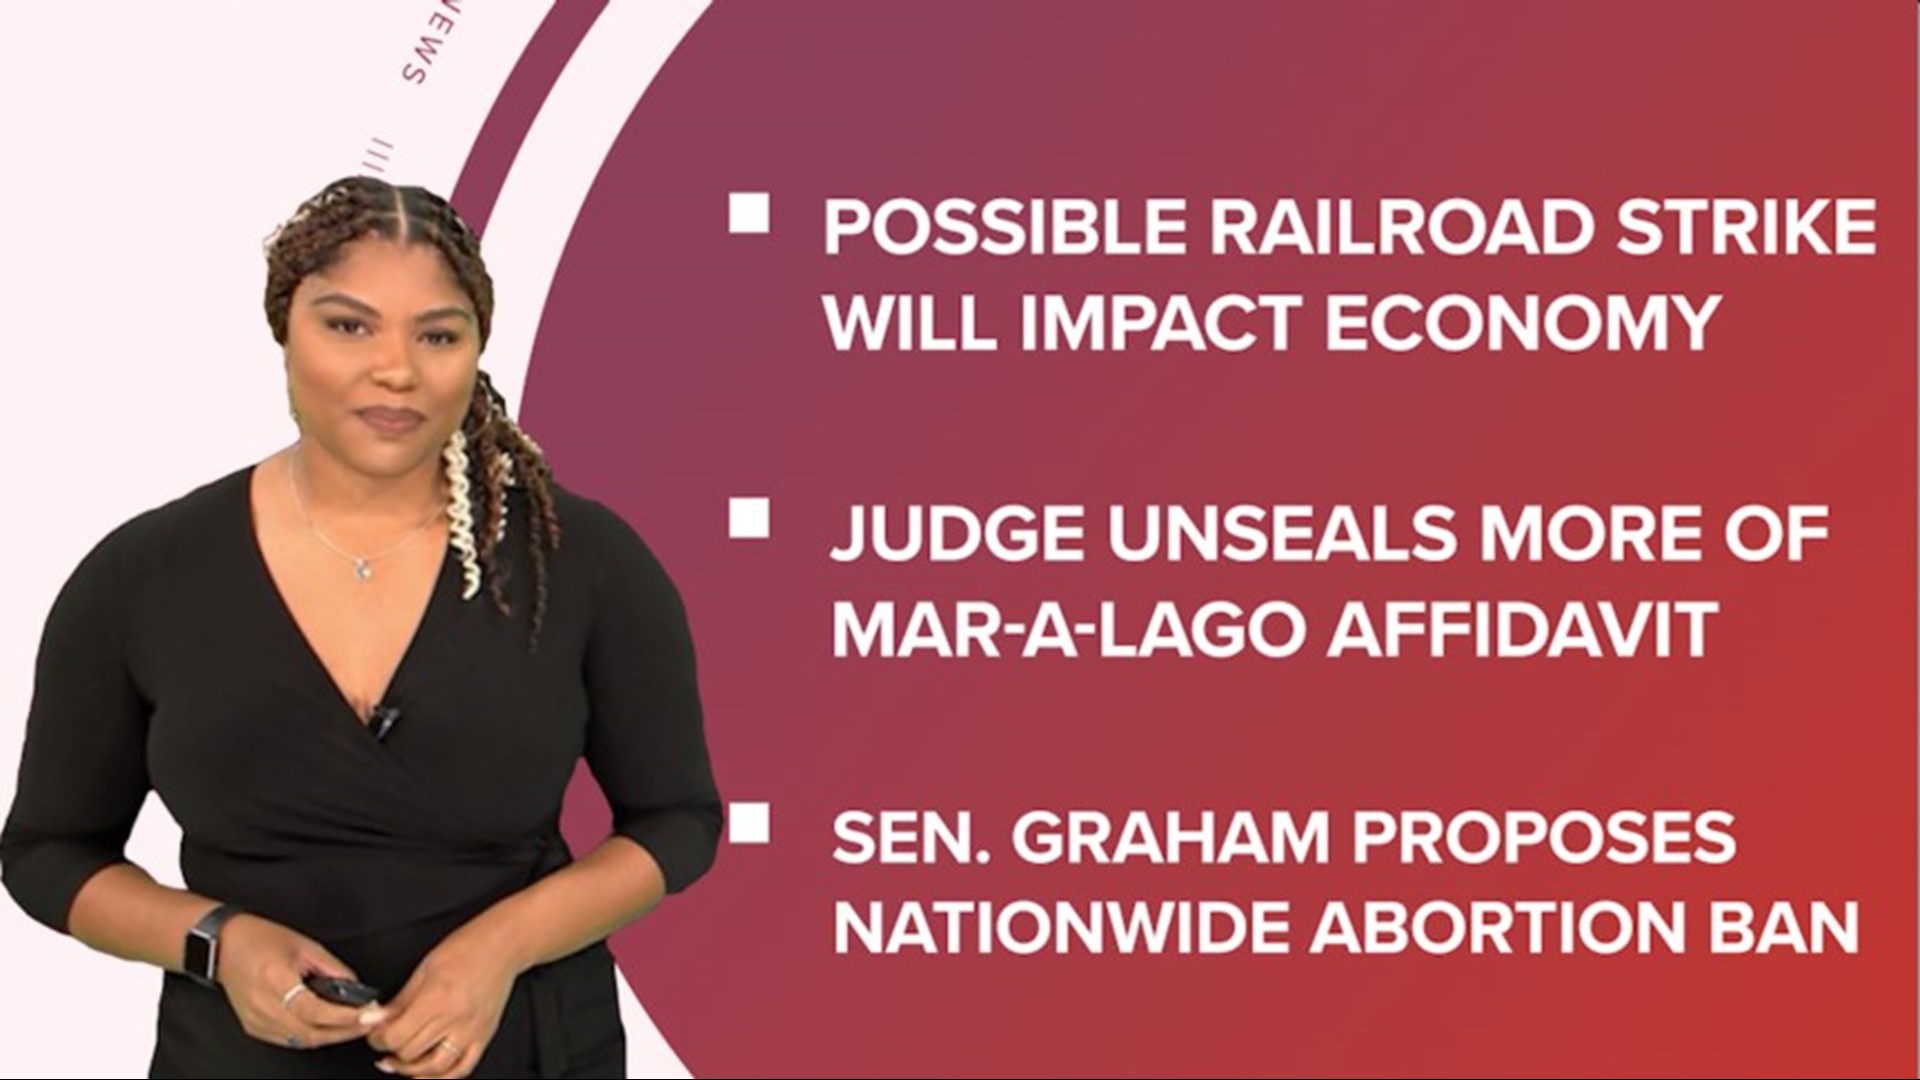 A look at what is happening in the news from a possible railroad strike and its possible impacts on the economy to a nationwide abortion ban proposal.